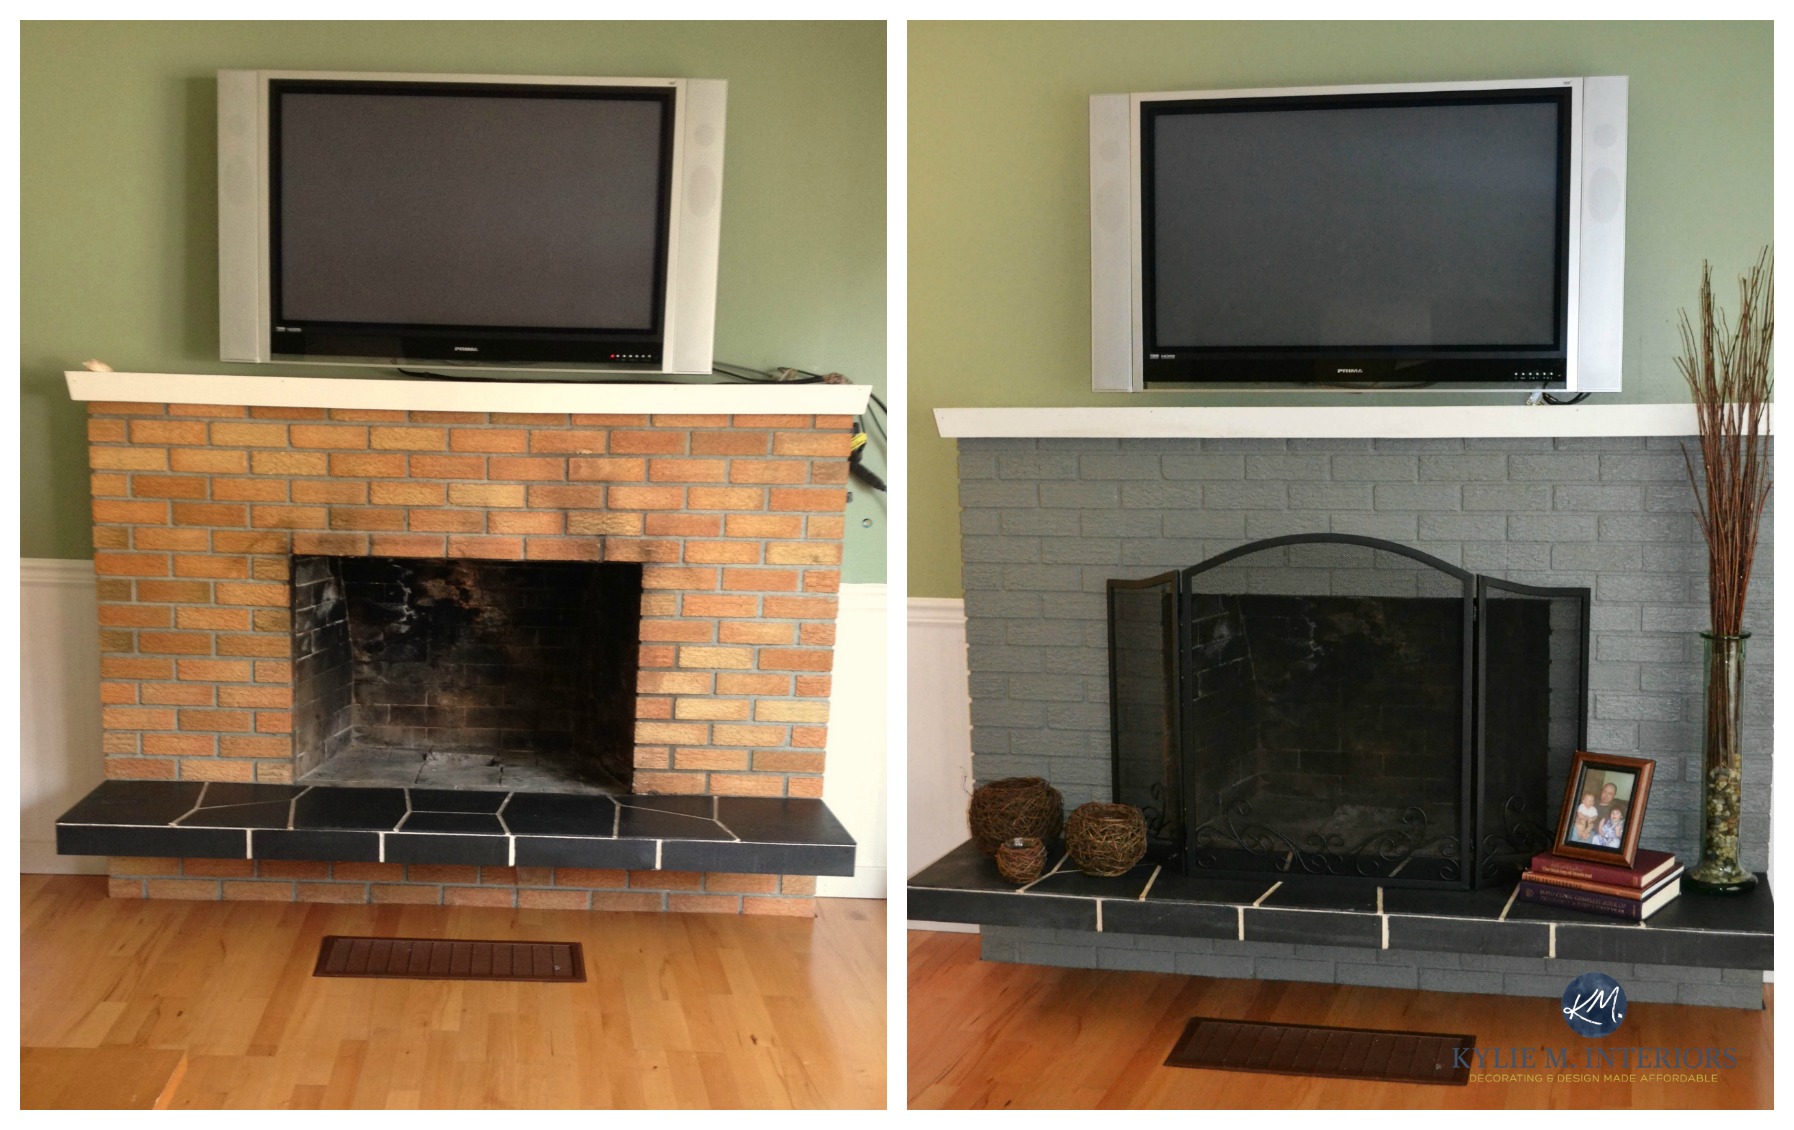 50 Fireplace Makeovers For The Changing Seasons and Holidays